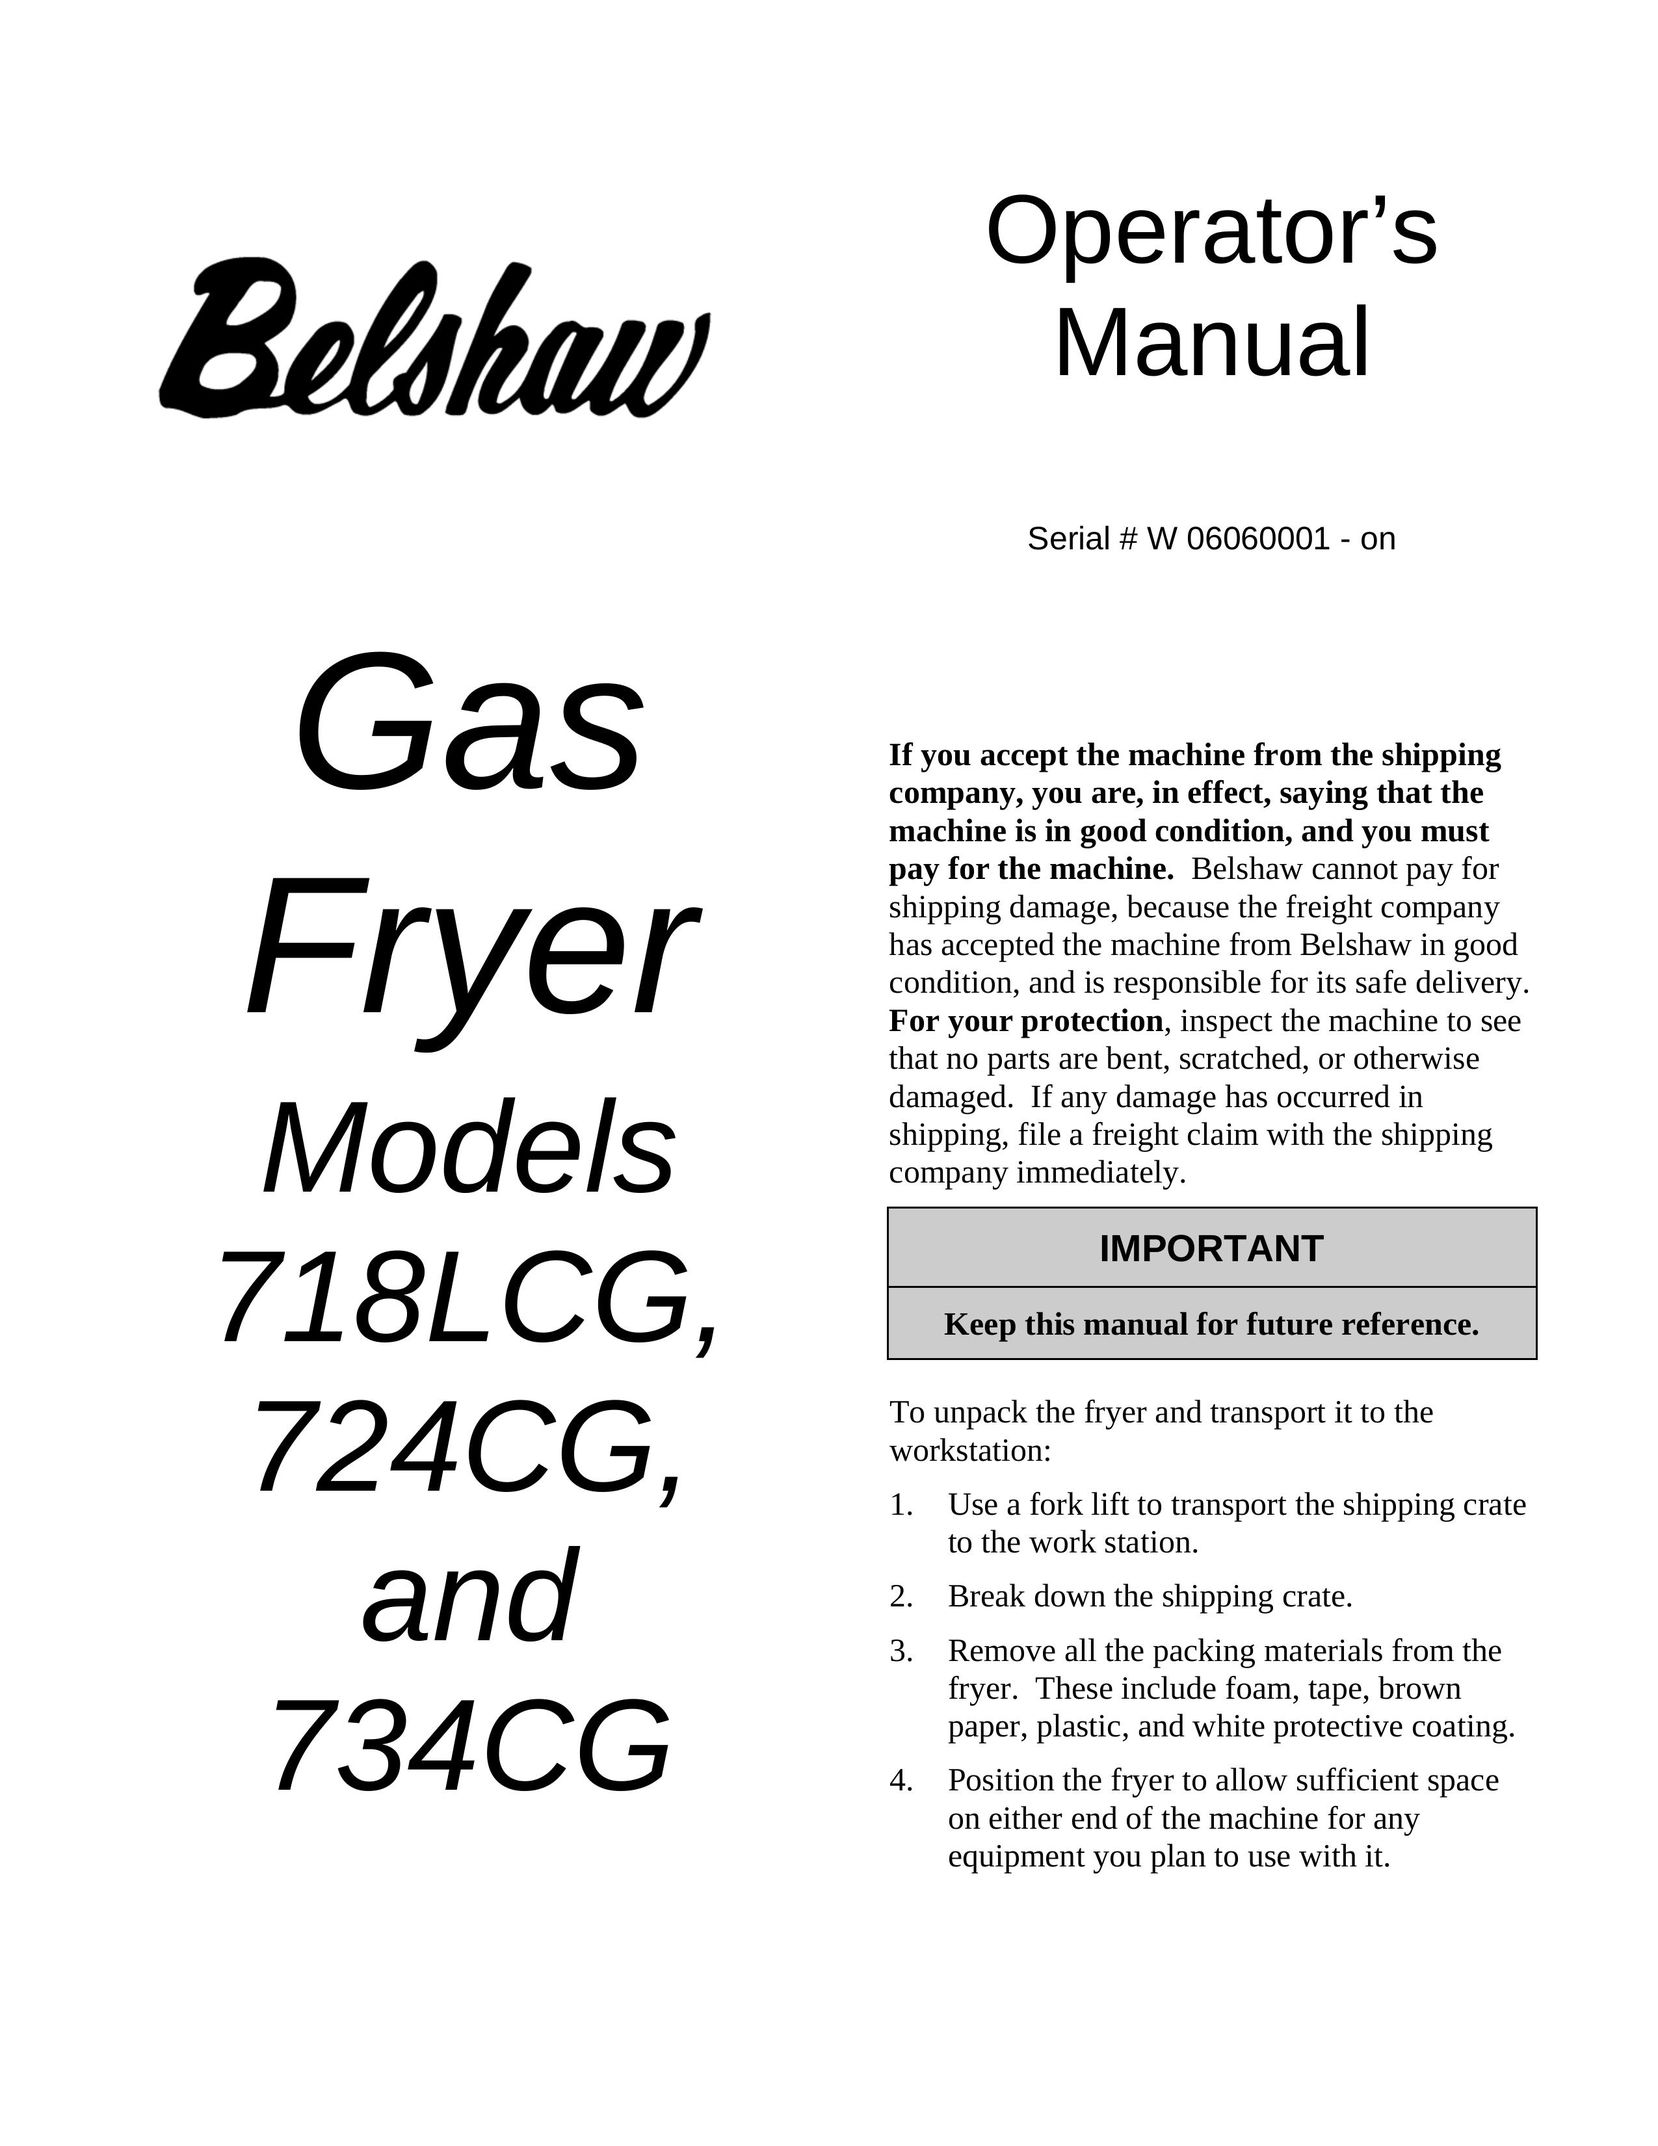 Belshaw Brothers and 734CG Fryer User Manual